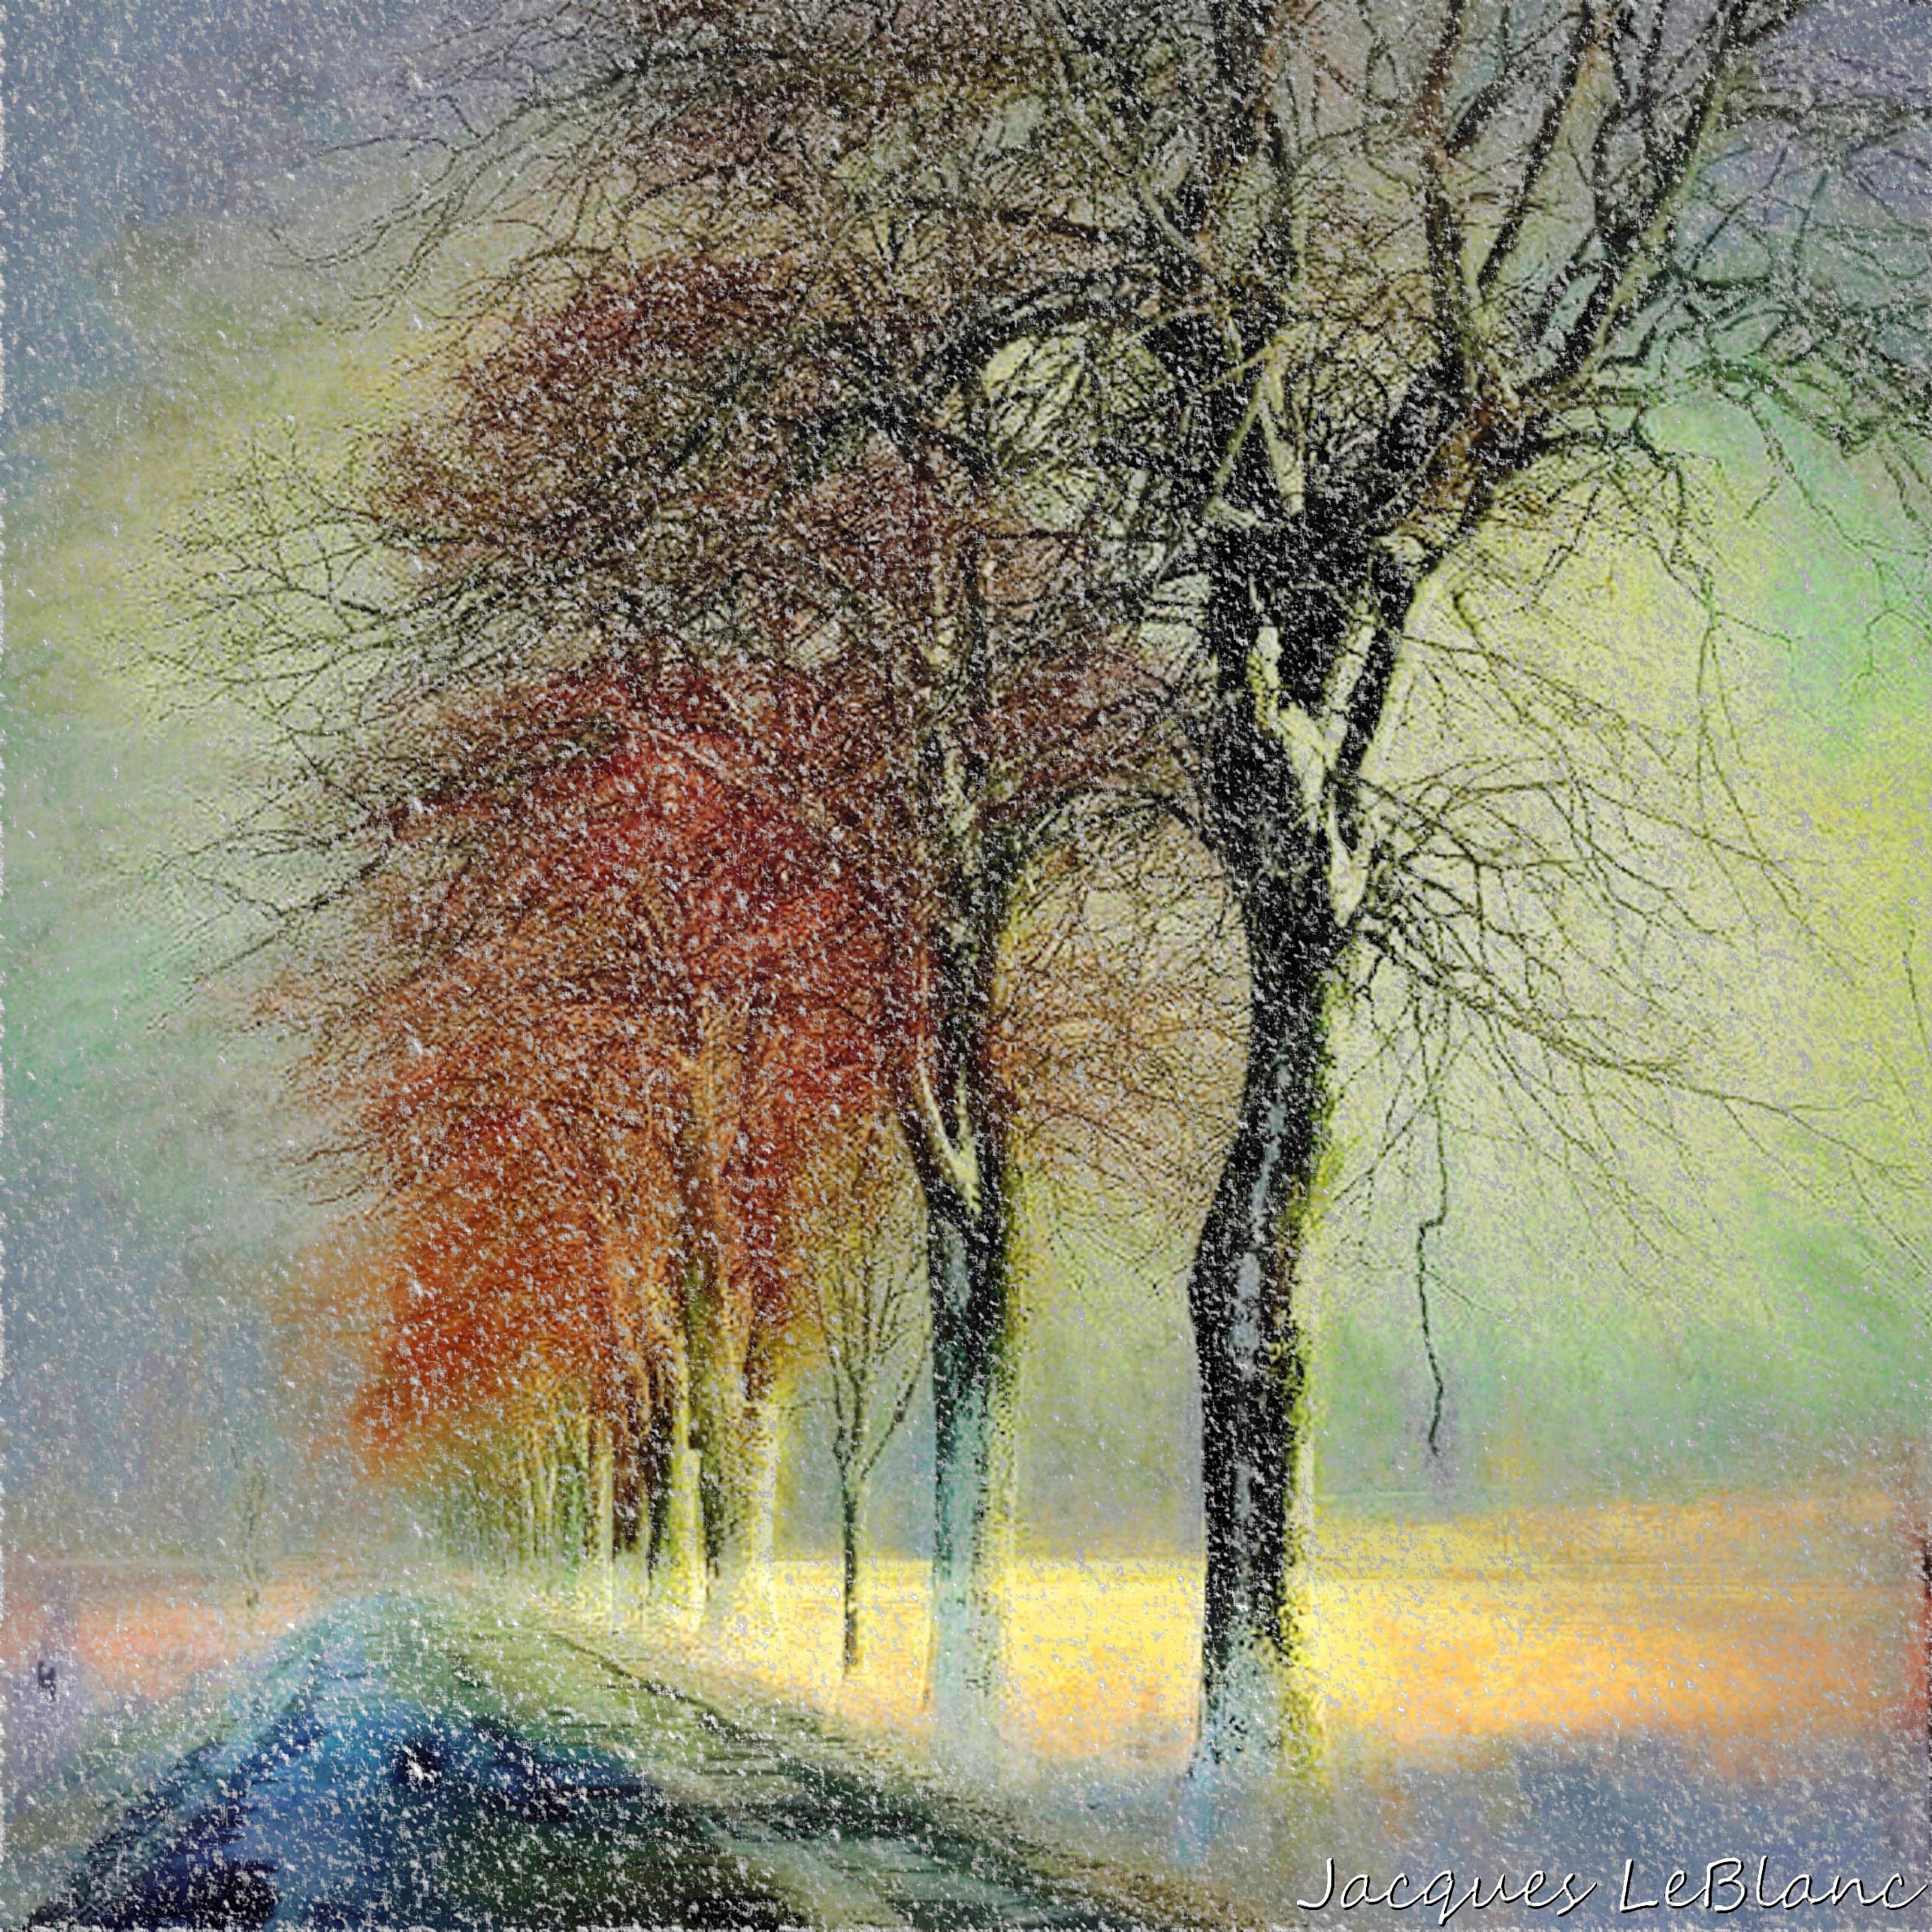 A field becomes illuminated by a shaft of light during a snowstorm along this country road.